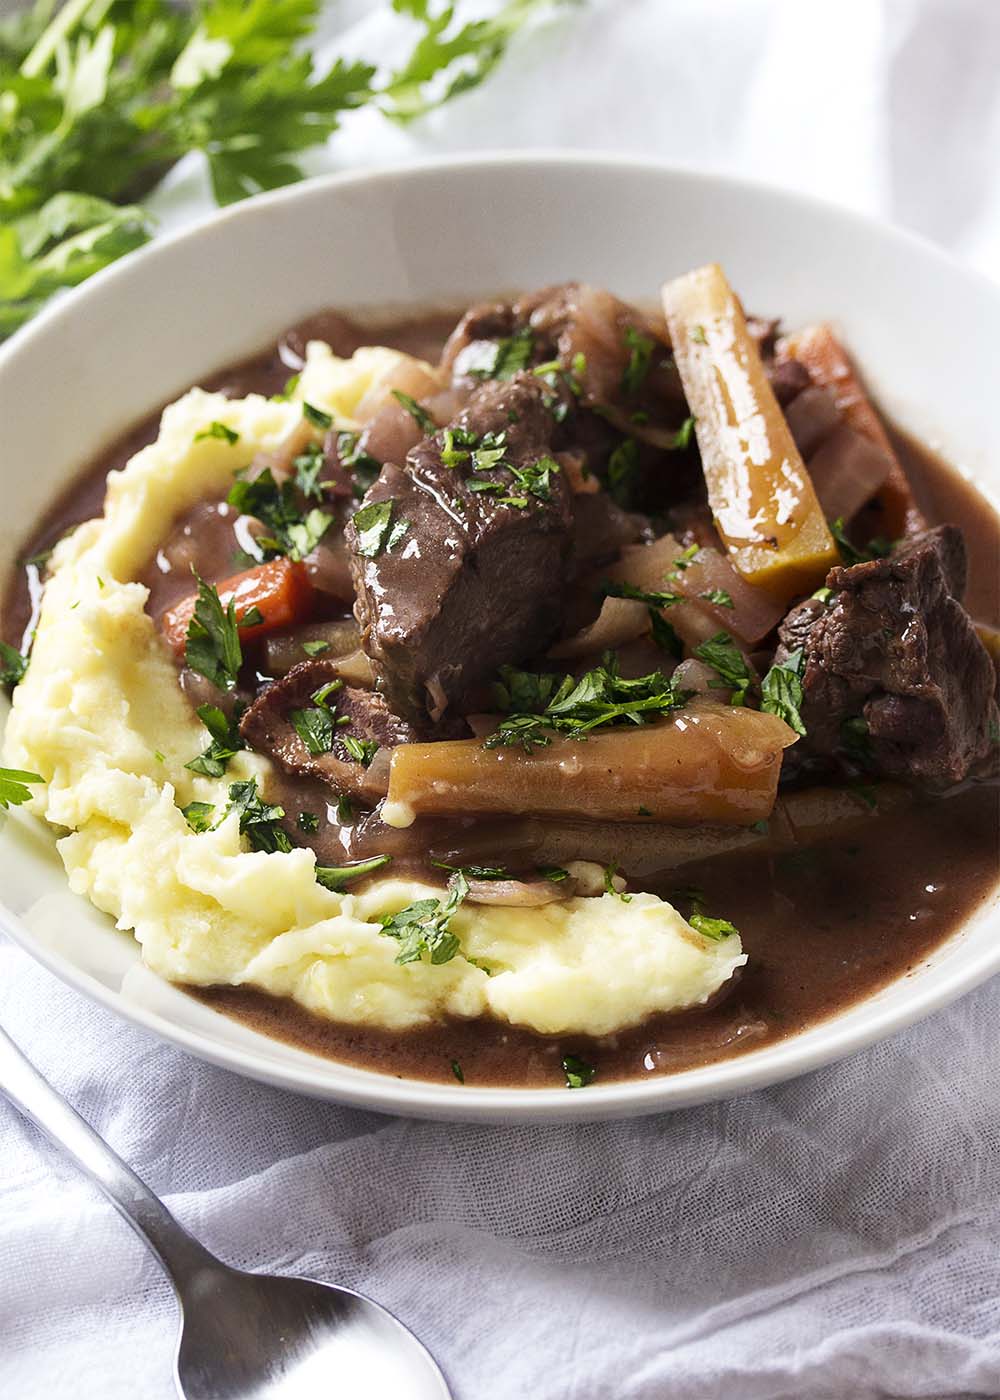 Grab a bottle of Burgundy or Pinot Noir because it's time to make some classic French comfort food! My recipe for slow cooker beef burgundy is wonderful to come home to after a long winter's day - tender beef, bacon, lots of onions, and carrots all in a rich red wine sauce.